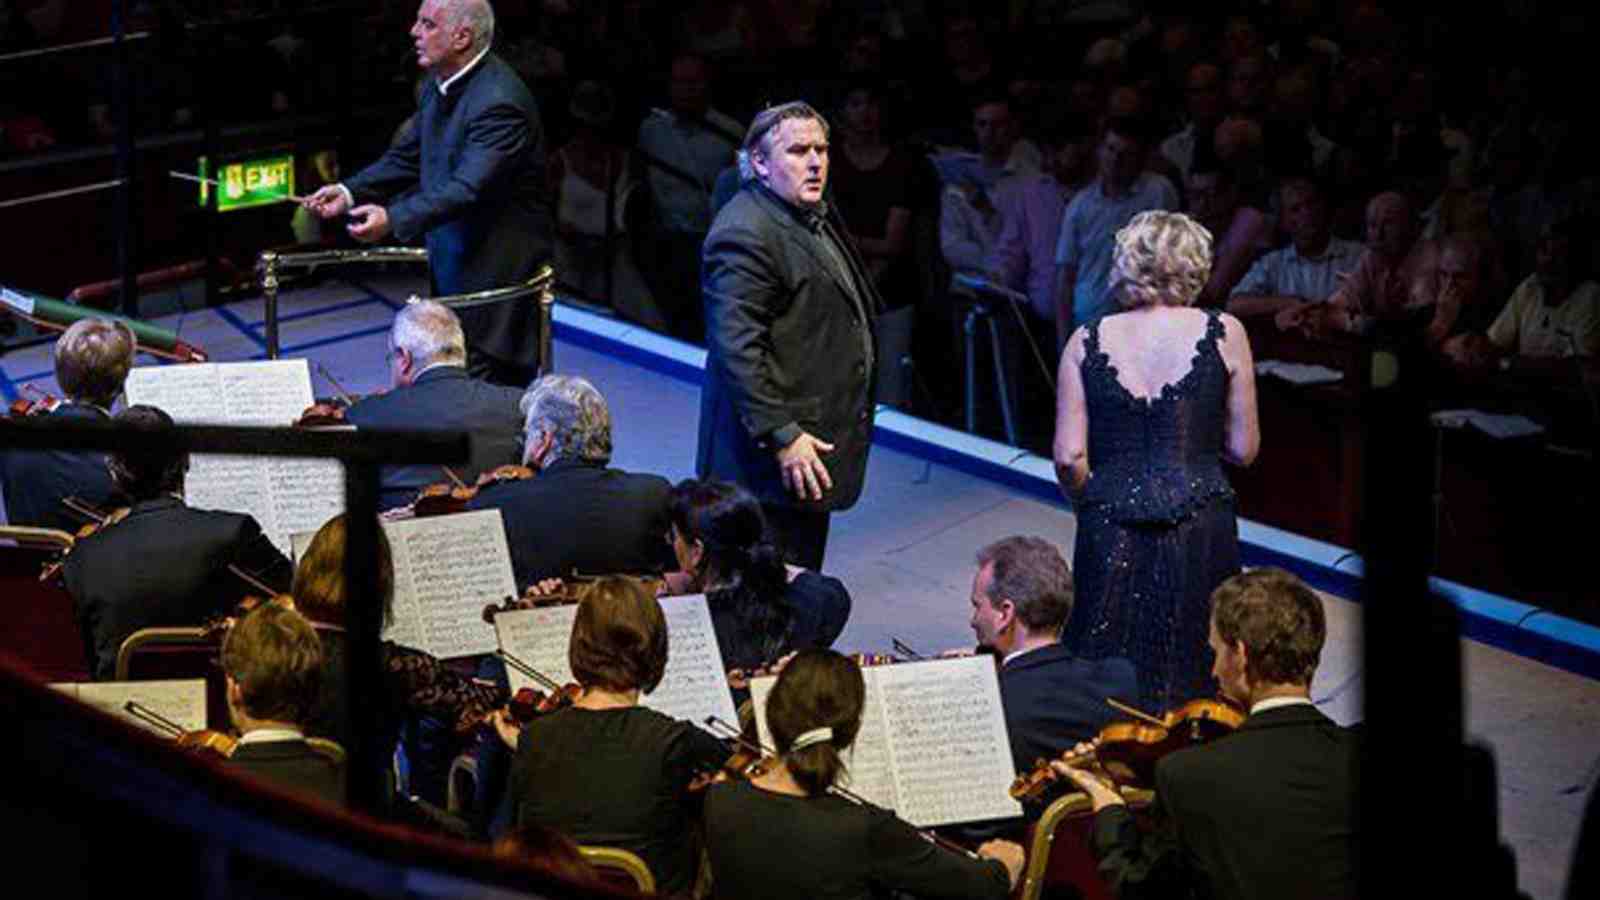 Simon O'Neill performing at the BBC Proms